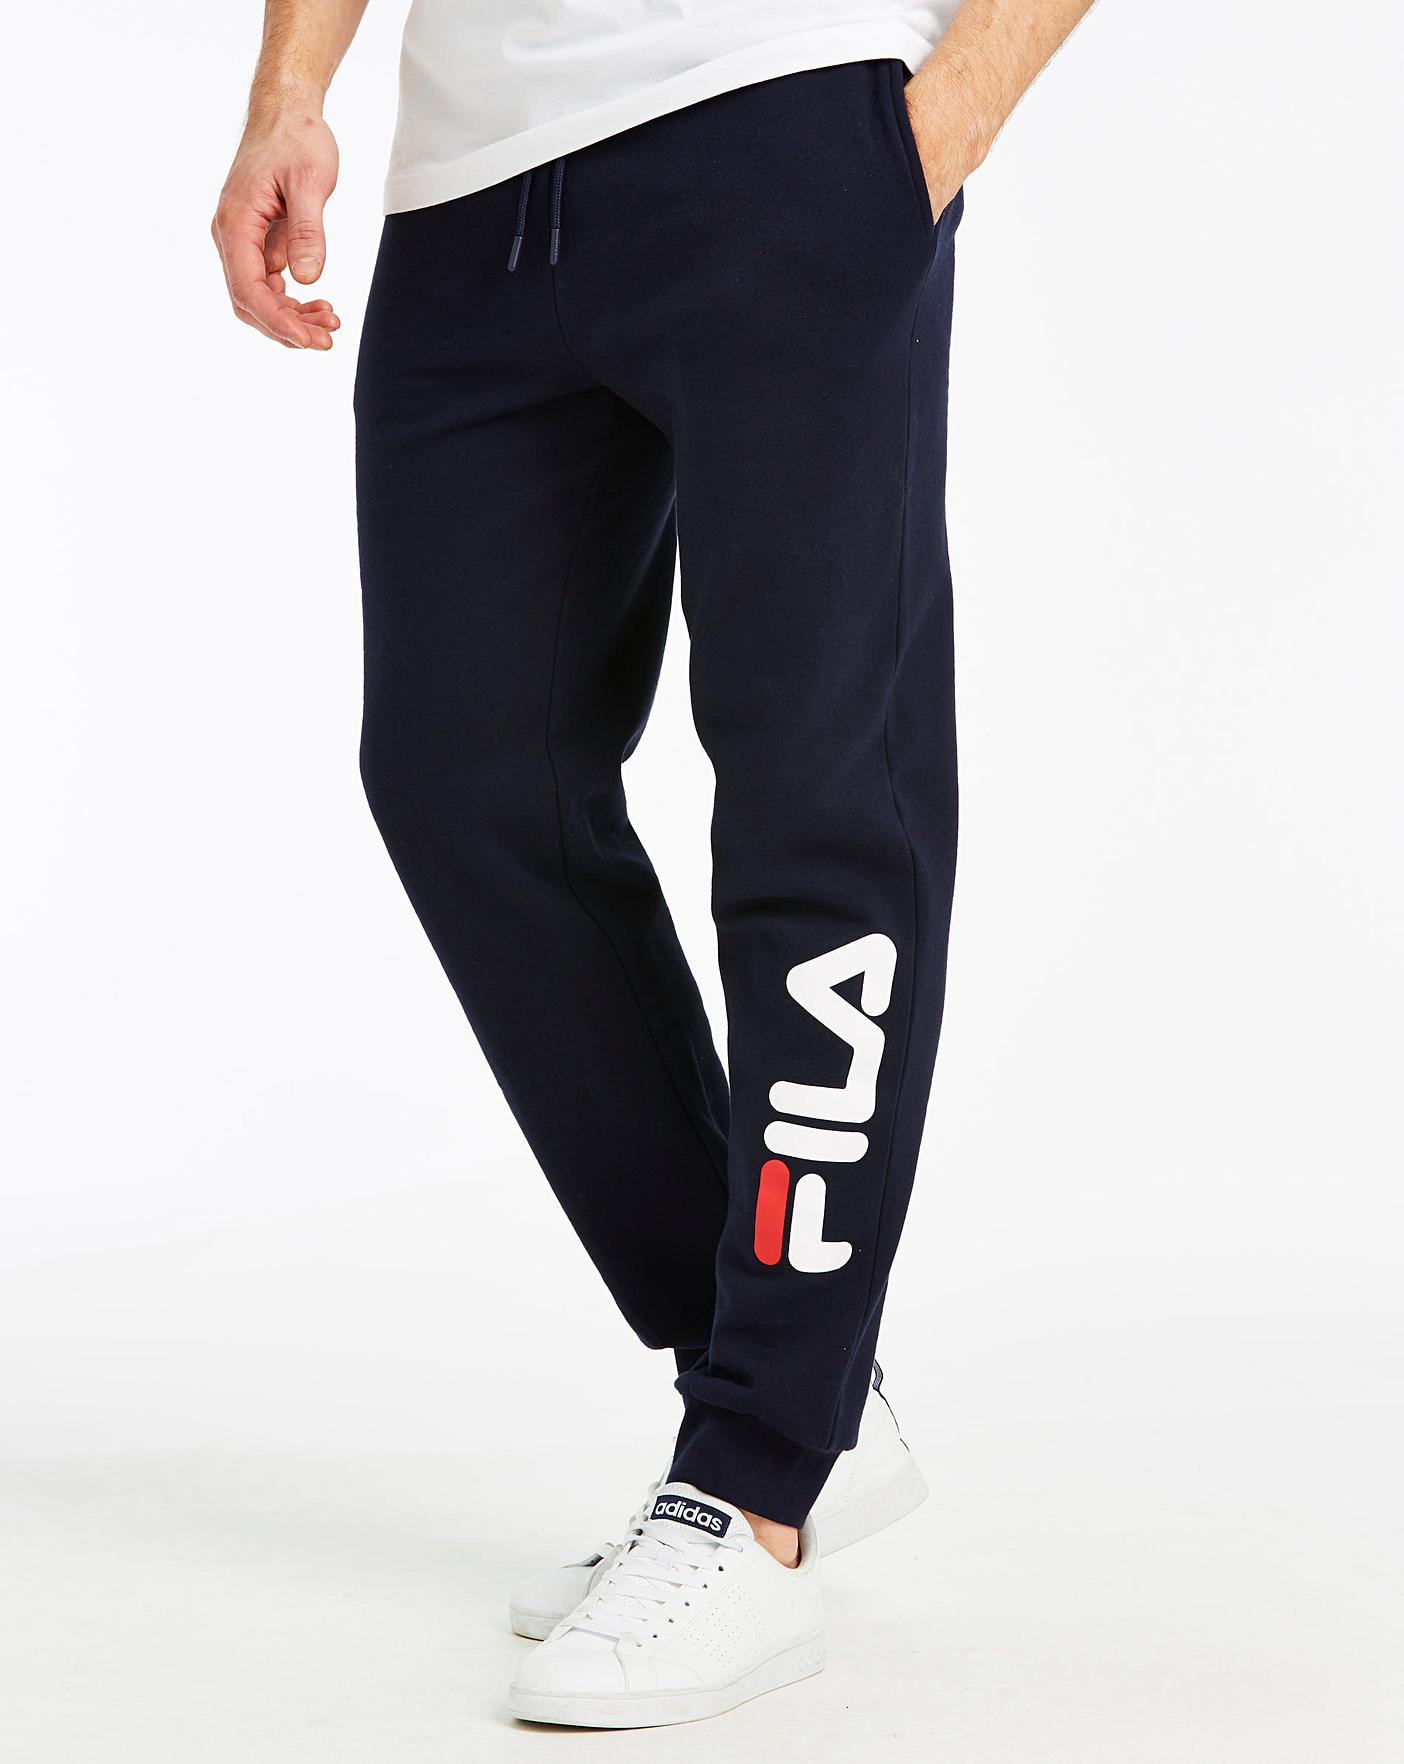 thick fila outfit Cheaper Than Retail Price> Buy Clothing, Accessories ...